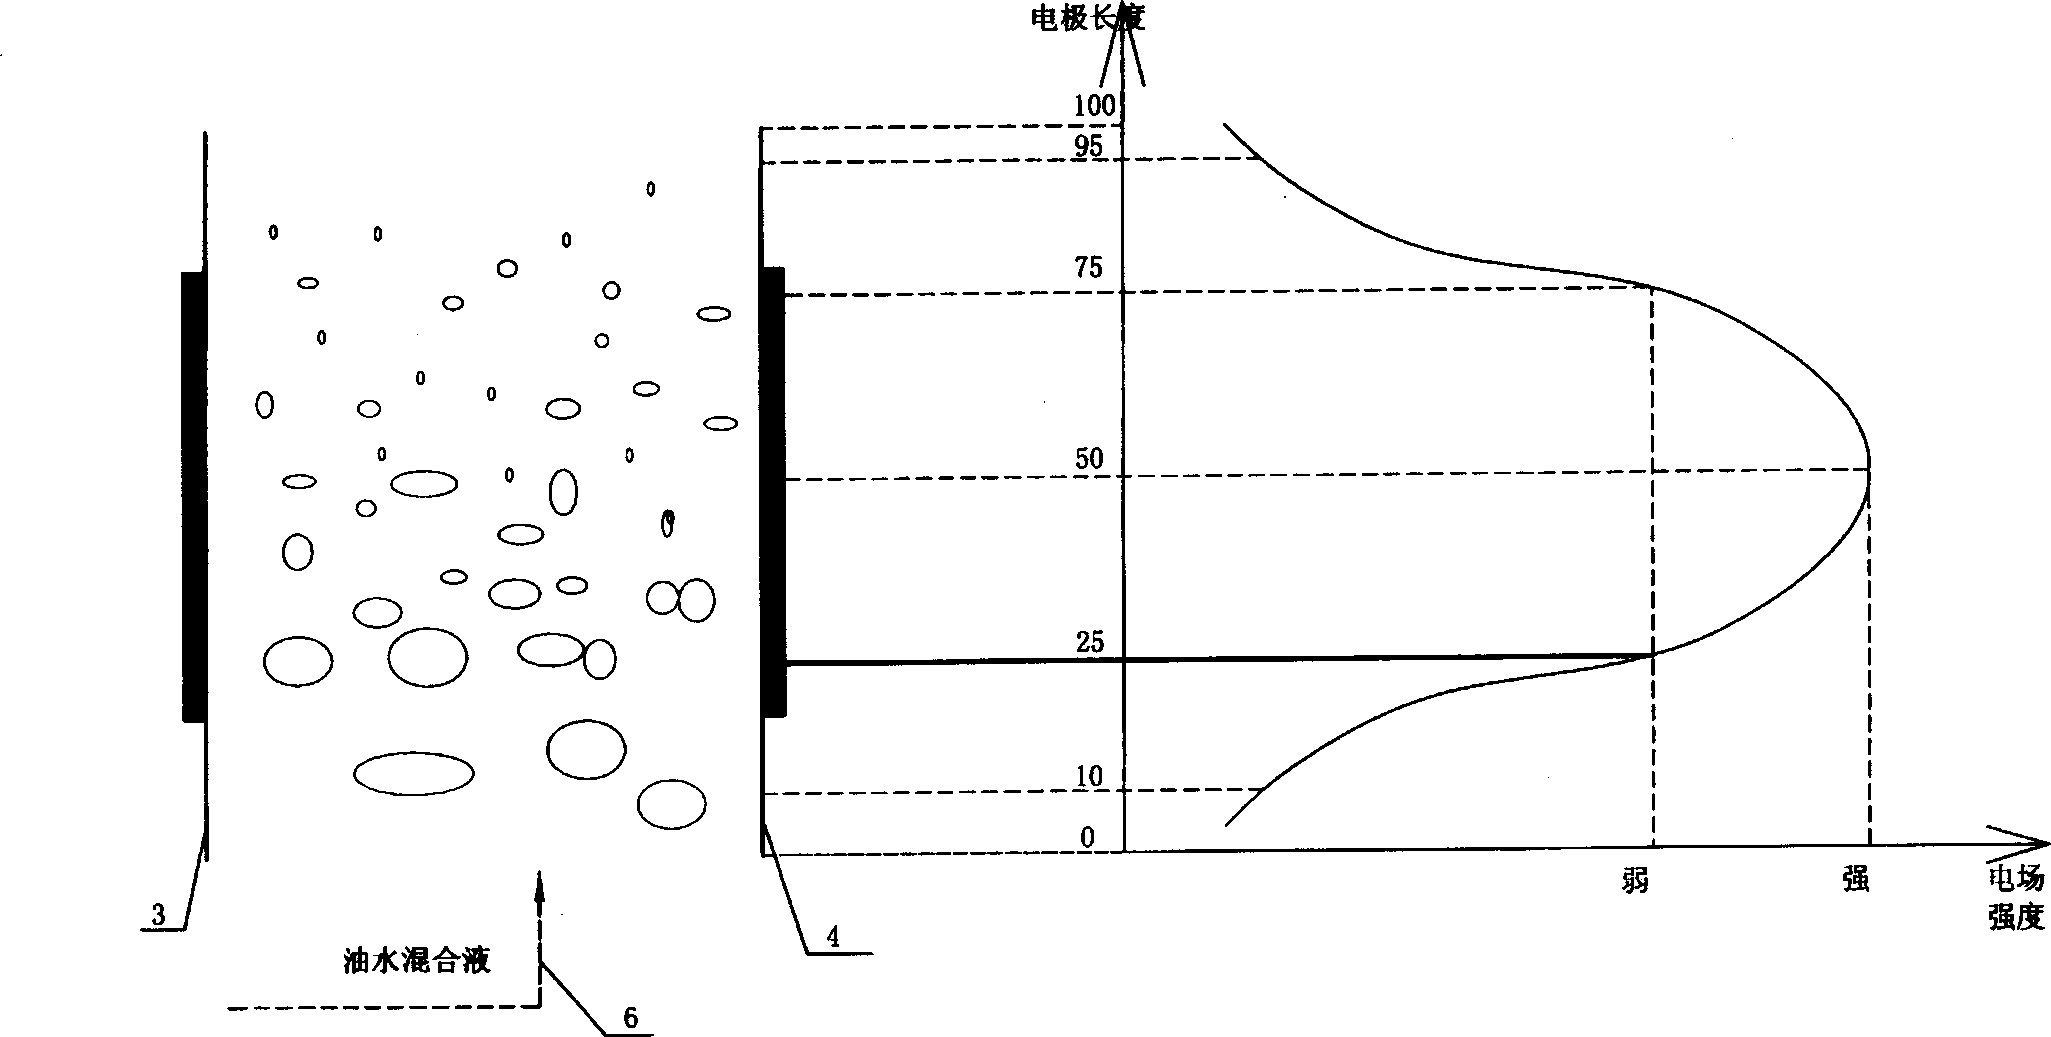 High-frequency and high-pressure oil and water separating method and devices